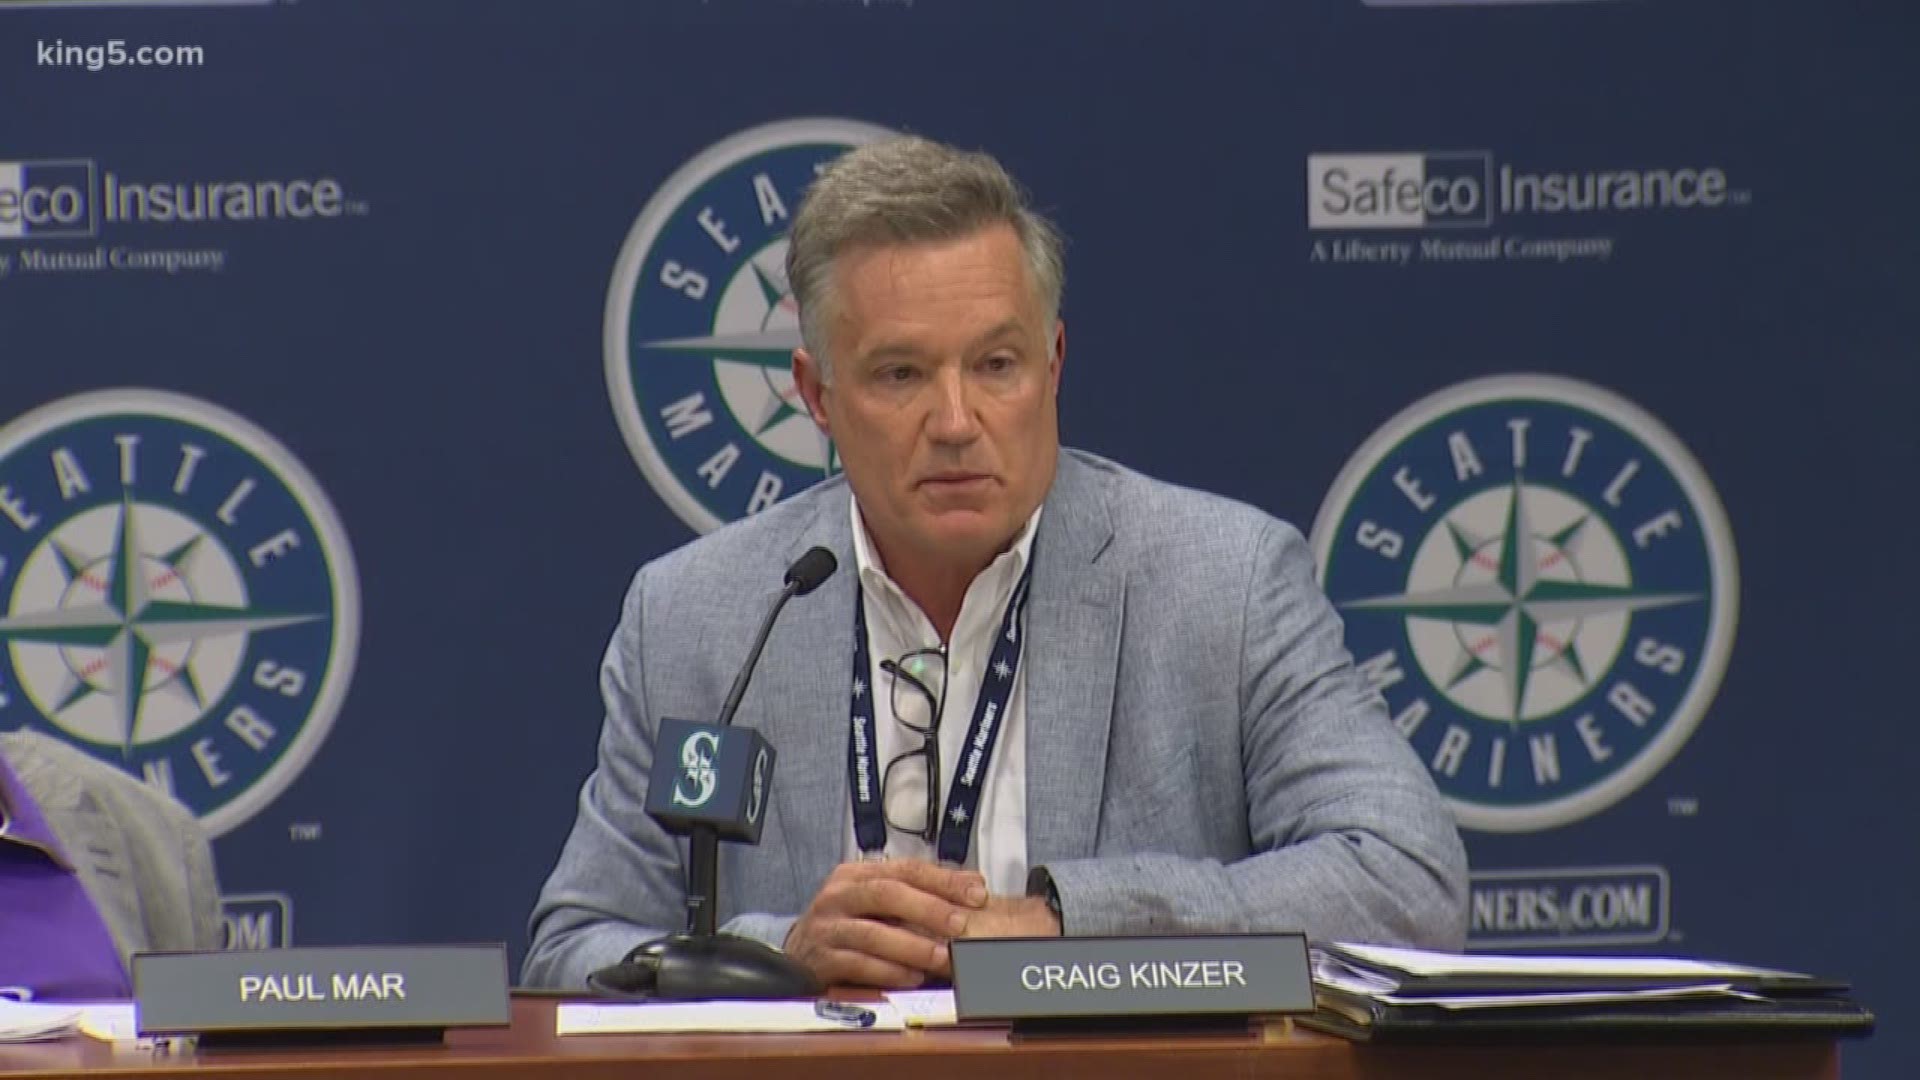 The Mariners have struck a deal to play the next 25 years at Safeco Field.